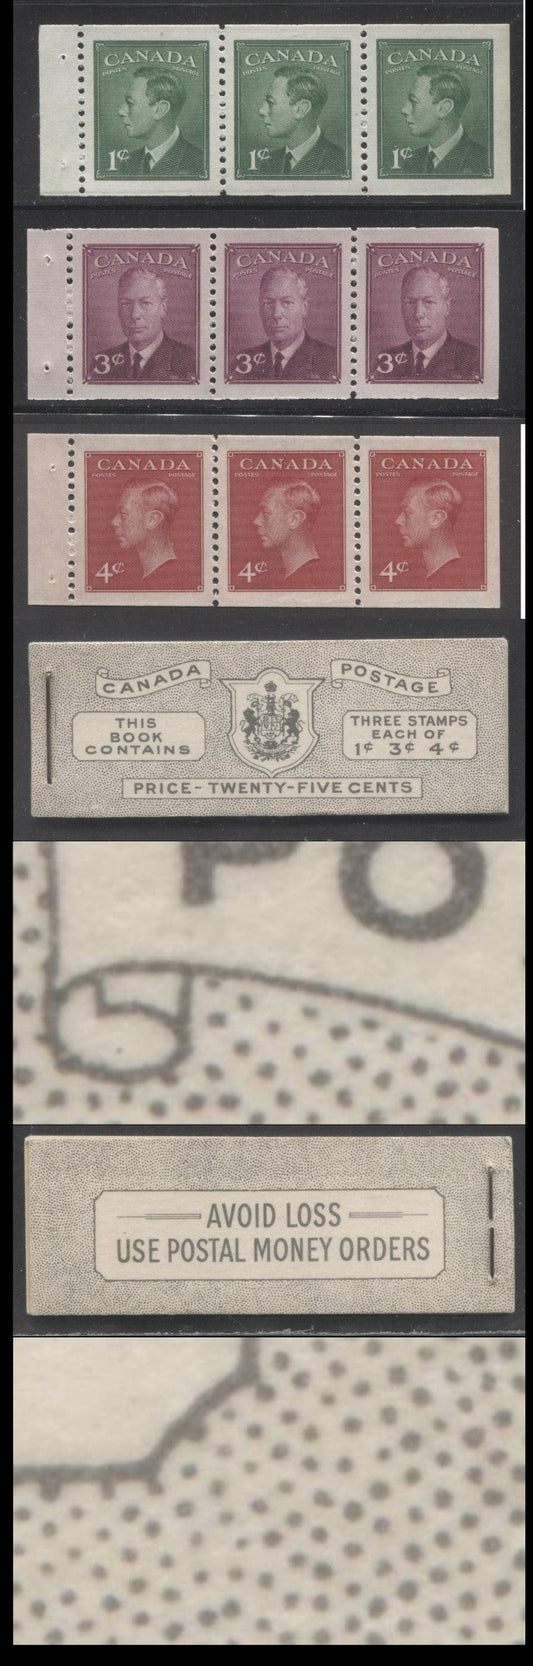 Lot 29 Canada #BK43b 1949-1953 Postes-Postage Issue Complete 25c English, Booklet Containing 1 Pane of 3 of Each of the 1c Green, 3c Rose Purple and 4c Carmine King George VI, Harris Front Cover Type IVc, Back Cover Haii